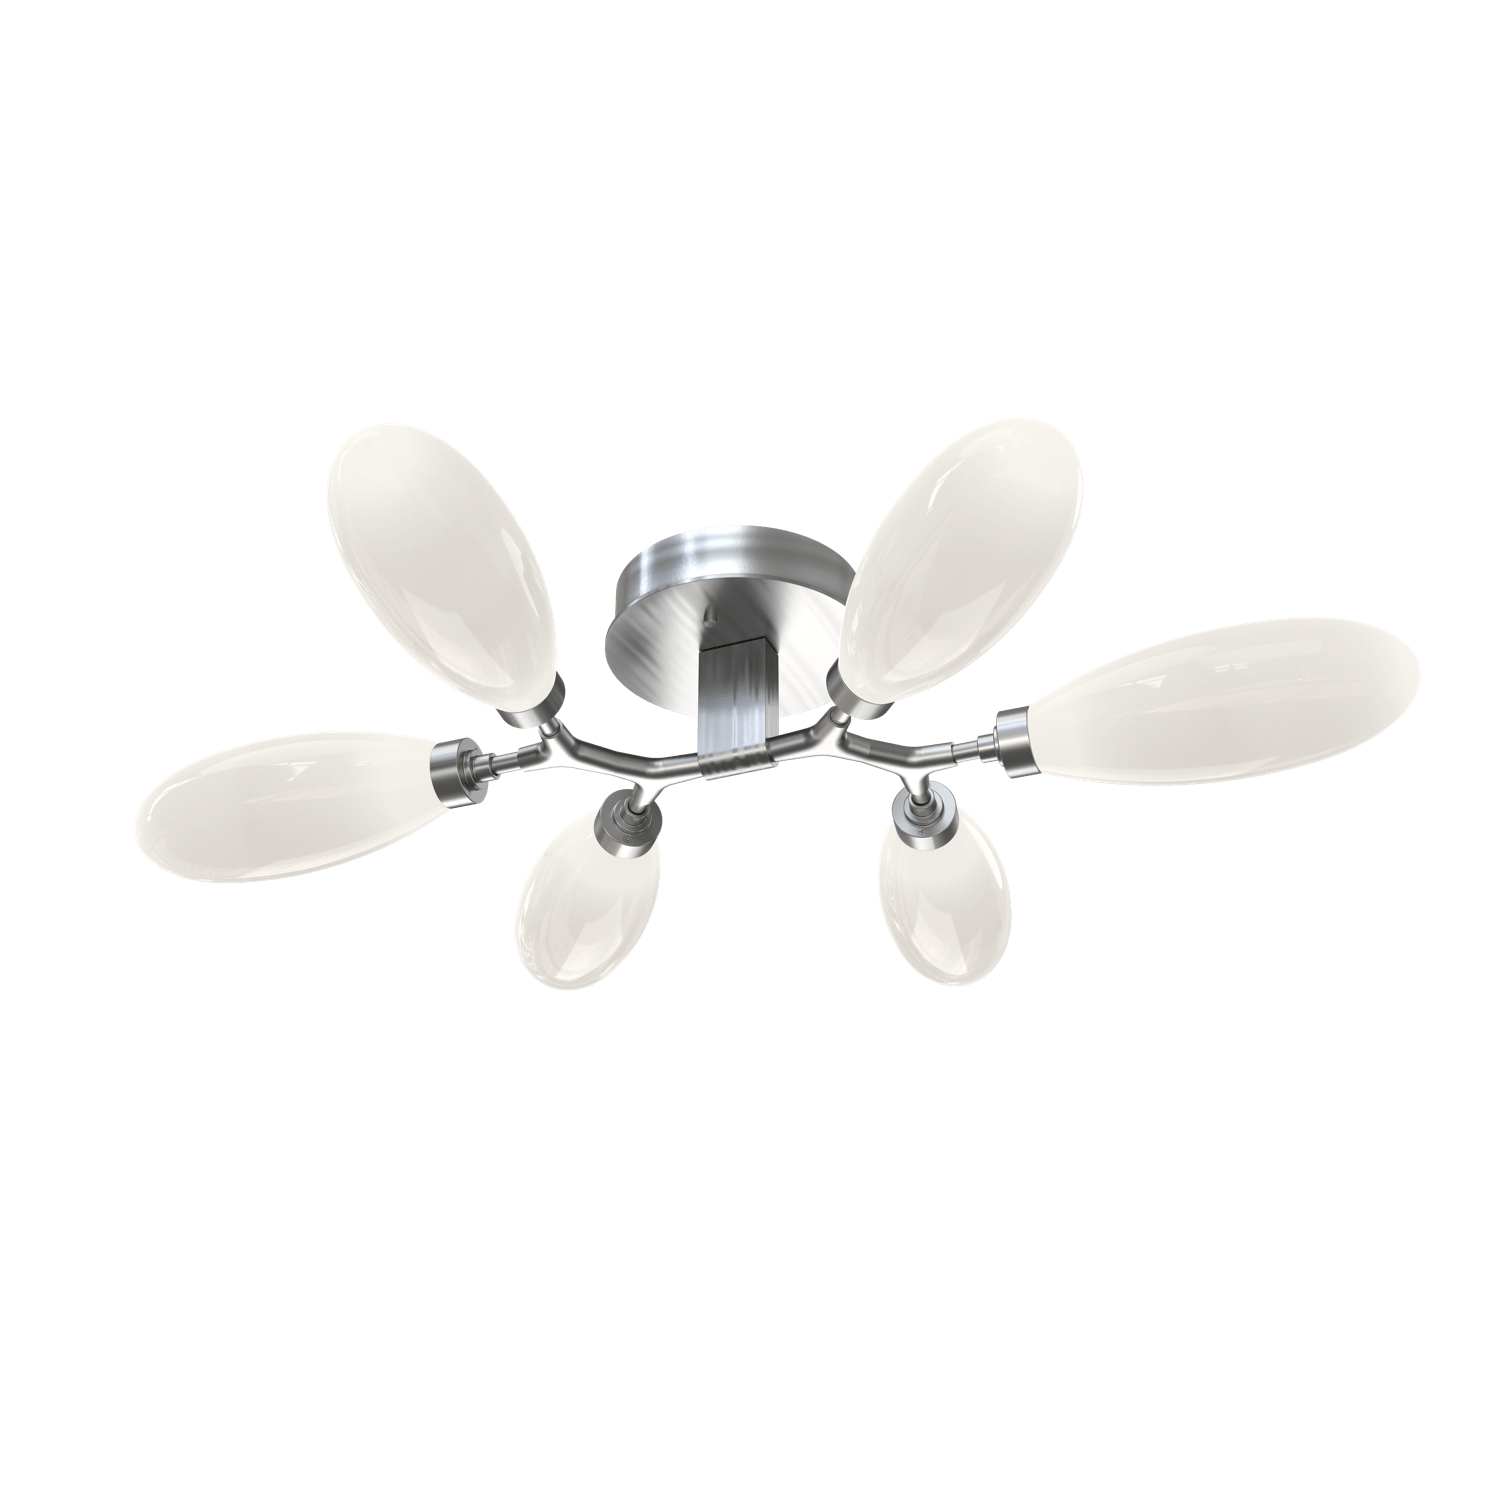 CLB0071-01-SN-WL-LL-Hammerton-Studio-Fiori-6-light-organic-flush-mount-light-with-satin-nickel-finish-and-opal-white-glass-shades-and-LED-lamping